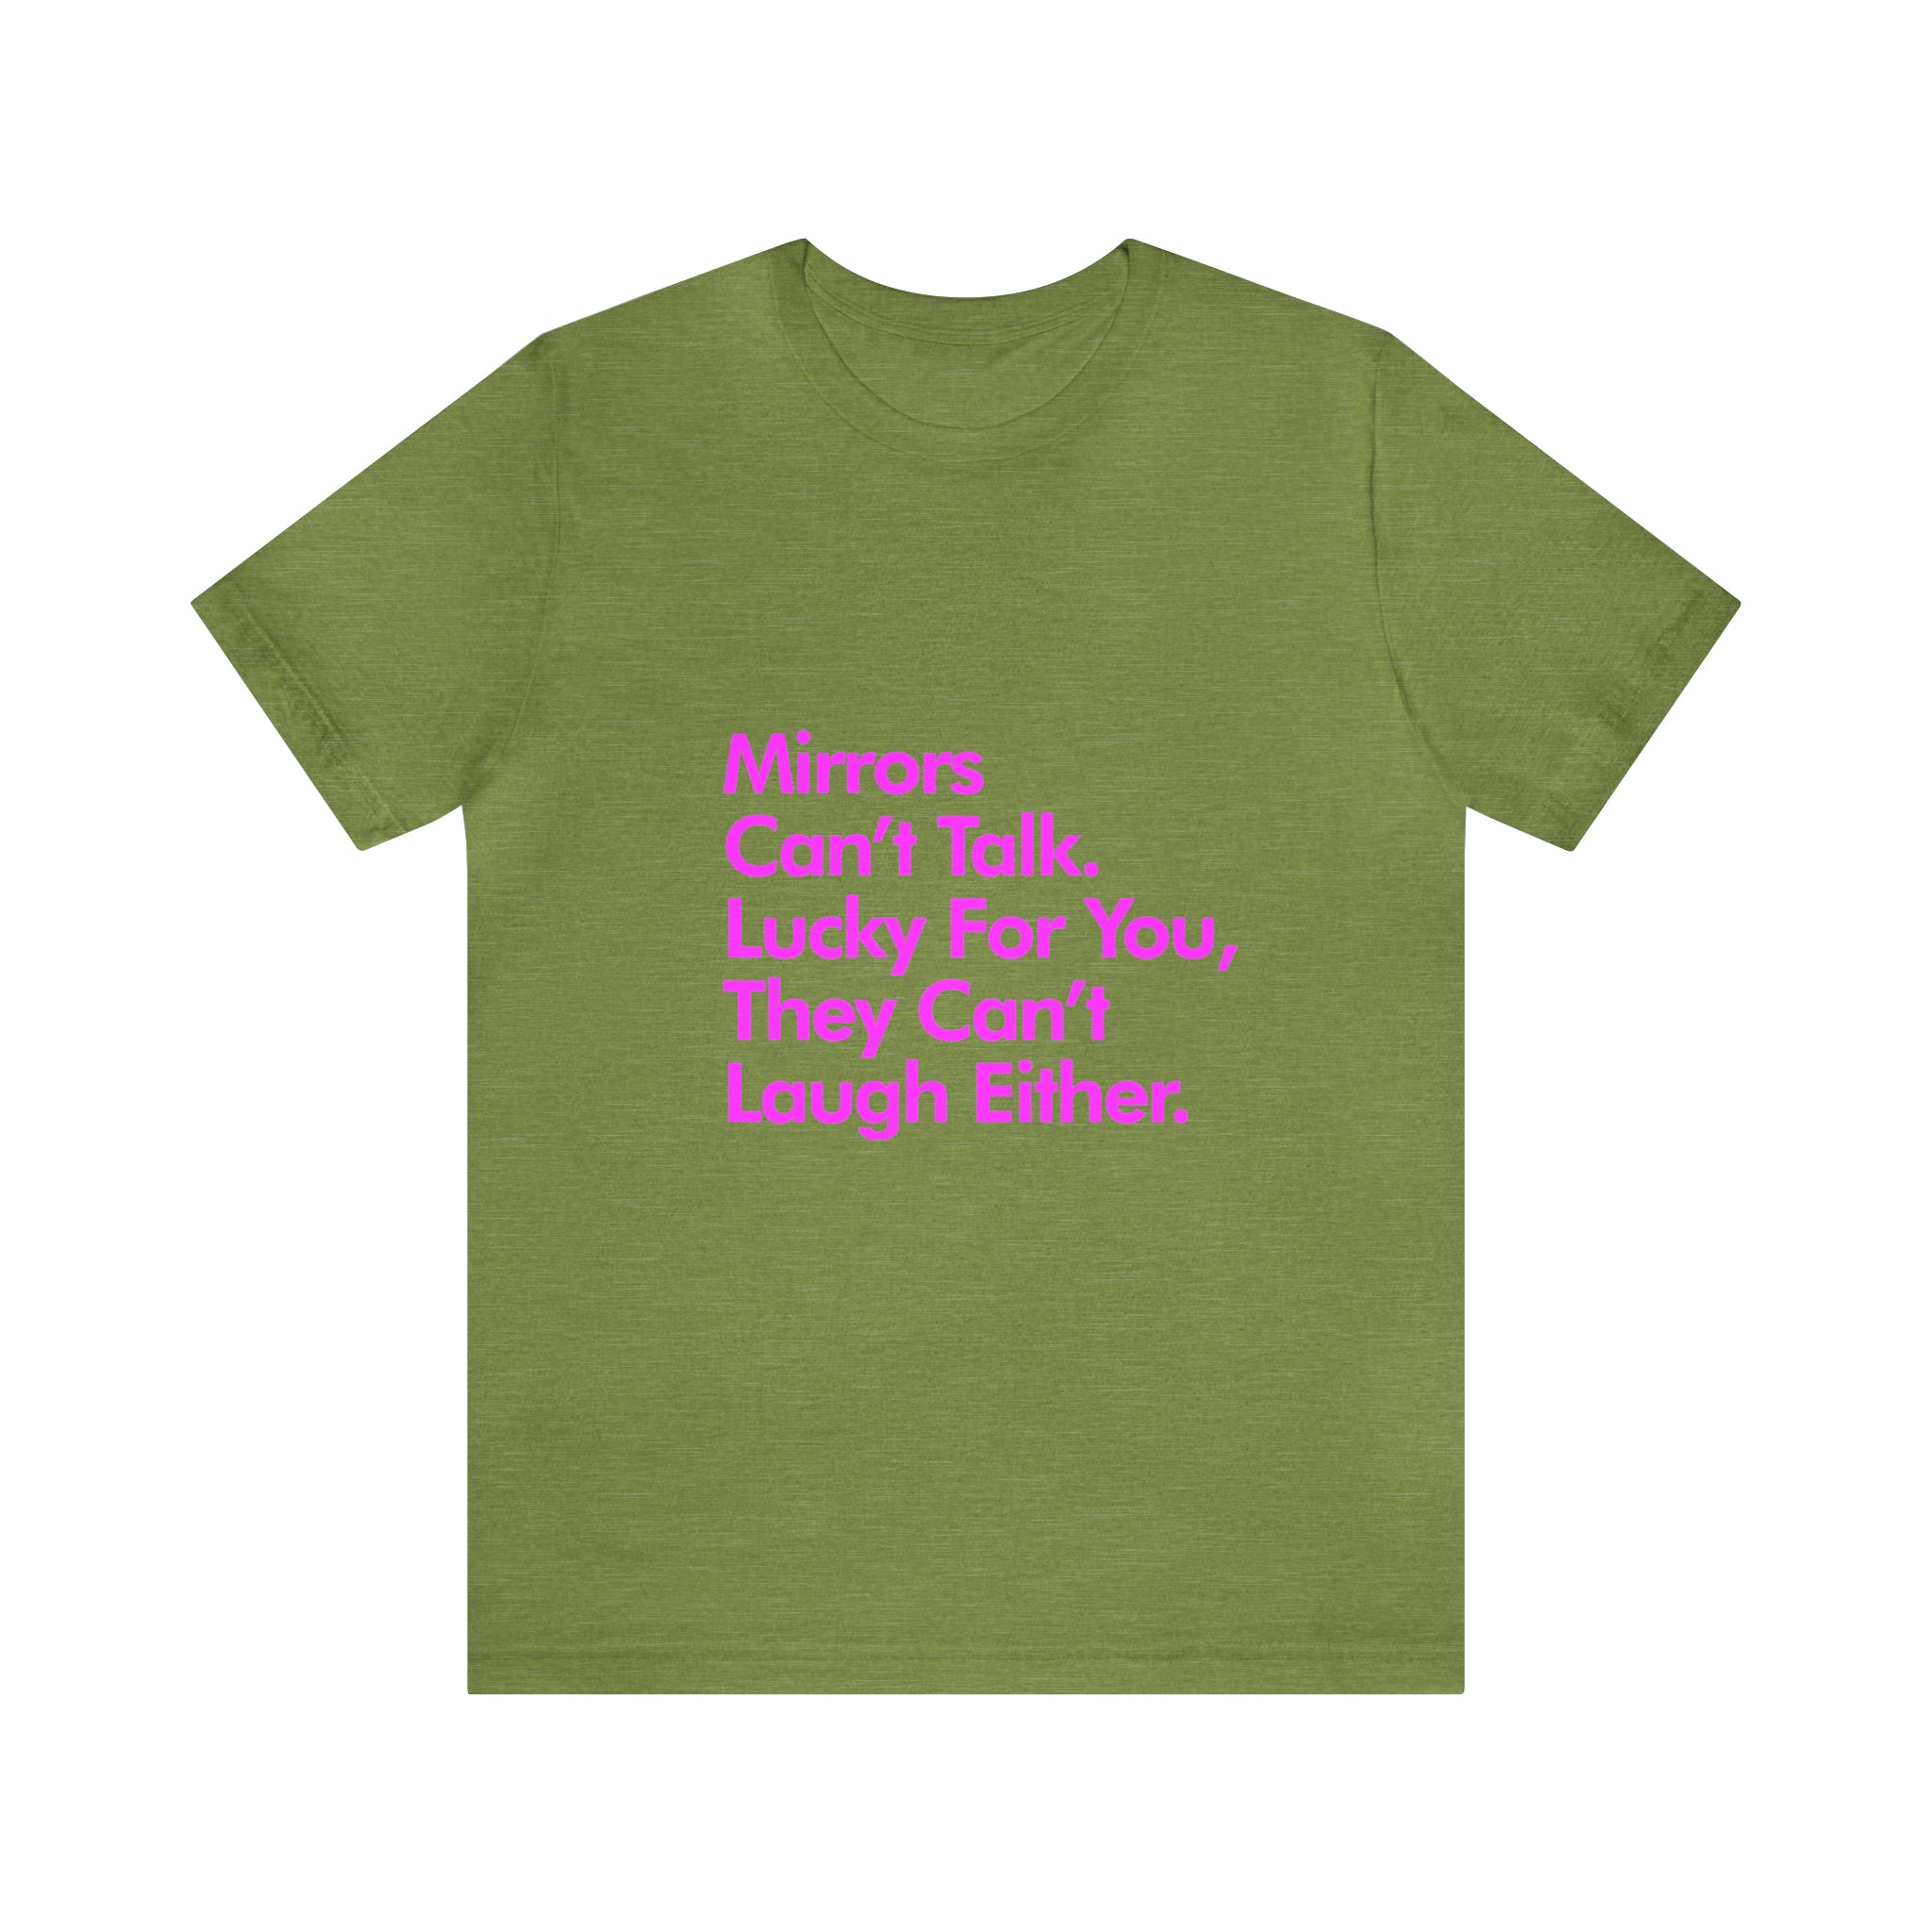 Mirrors cant talk lucky for you they cant laugh either T-Shirt